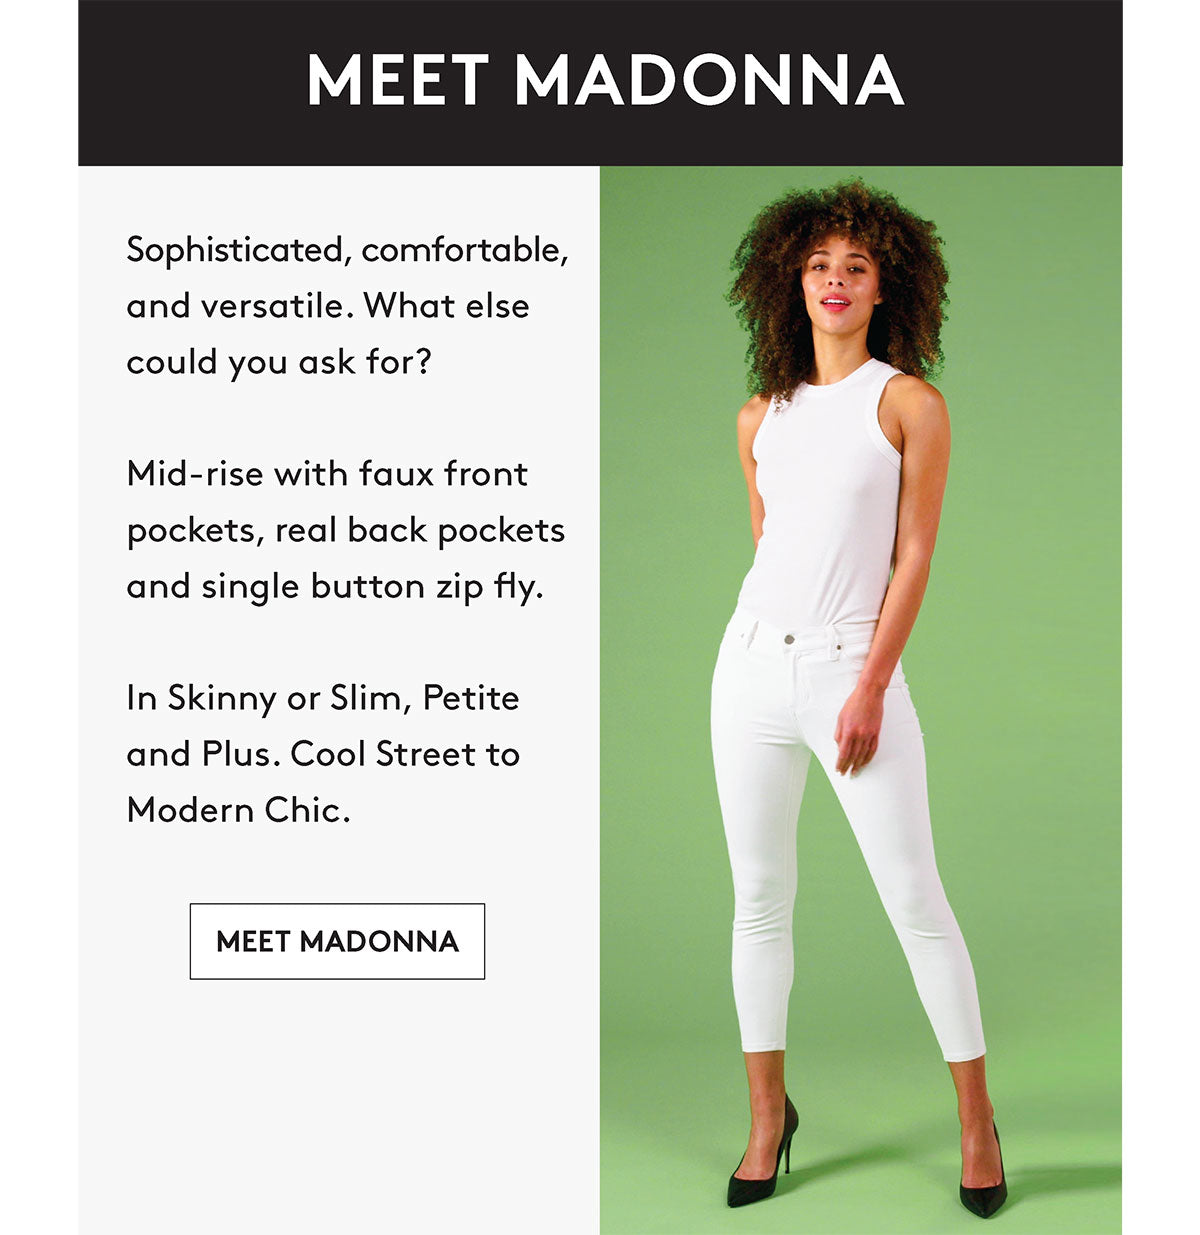 Sophisticated, comfortable, and versatile. What else could you ask for? Mid-rise with faux front pockets, real back pockets and single button zip fly. In Skinny or Slim, Petite and Plus. Cool Street to Modern Chic. MEET MADONNA